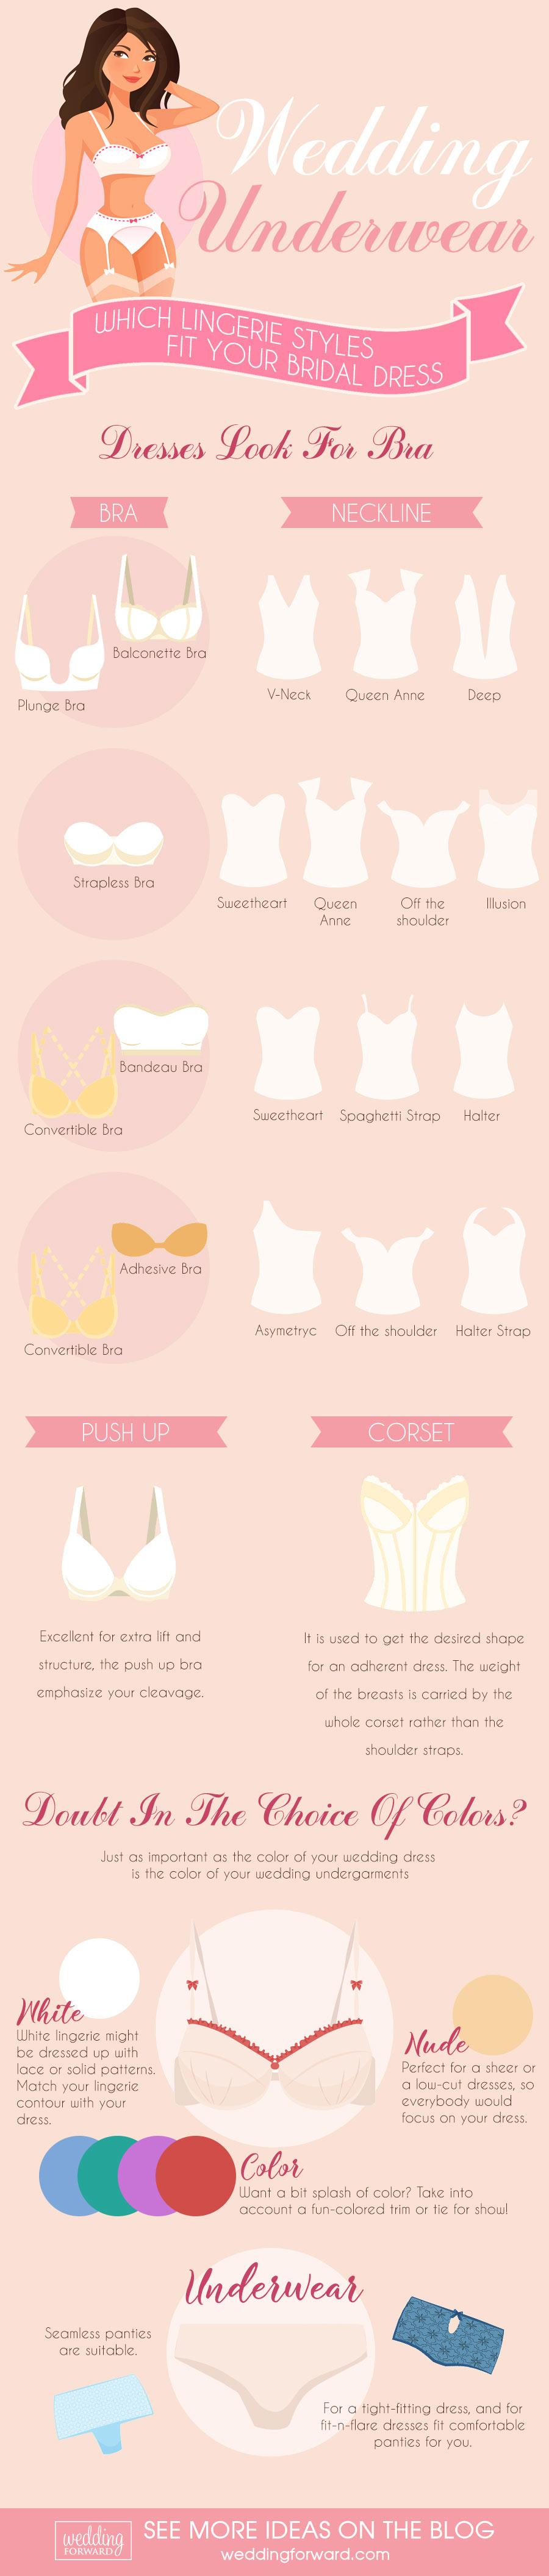 Which Lingerie Styles Fit Your Bridal Dress